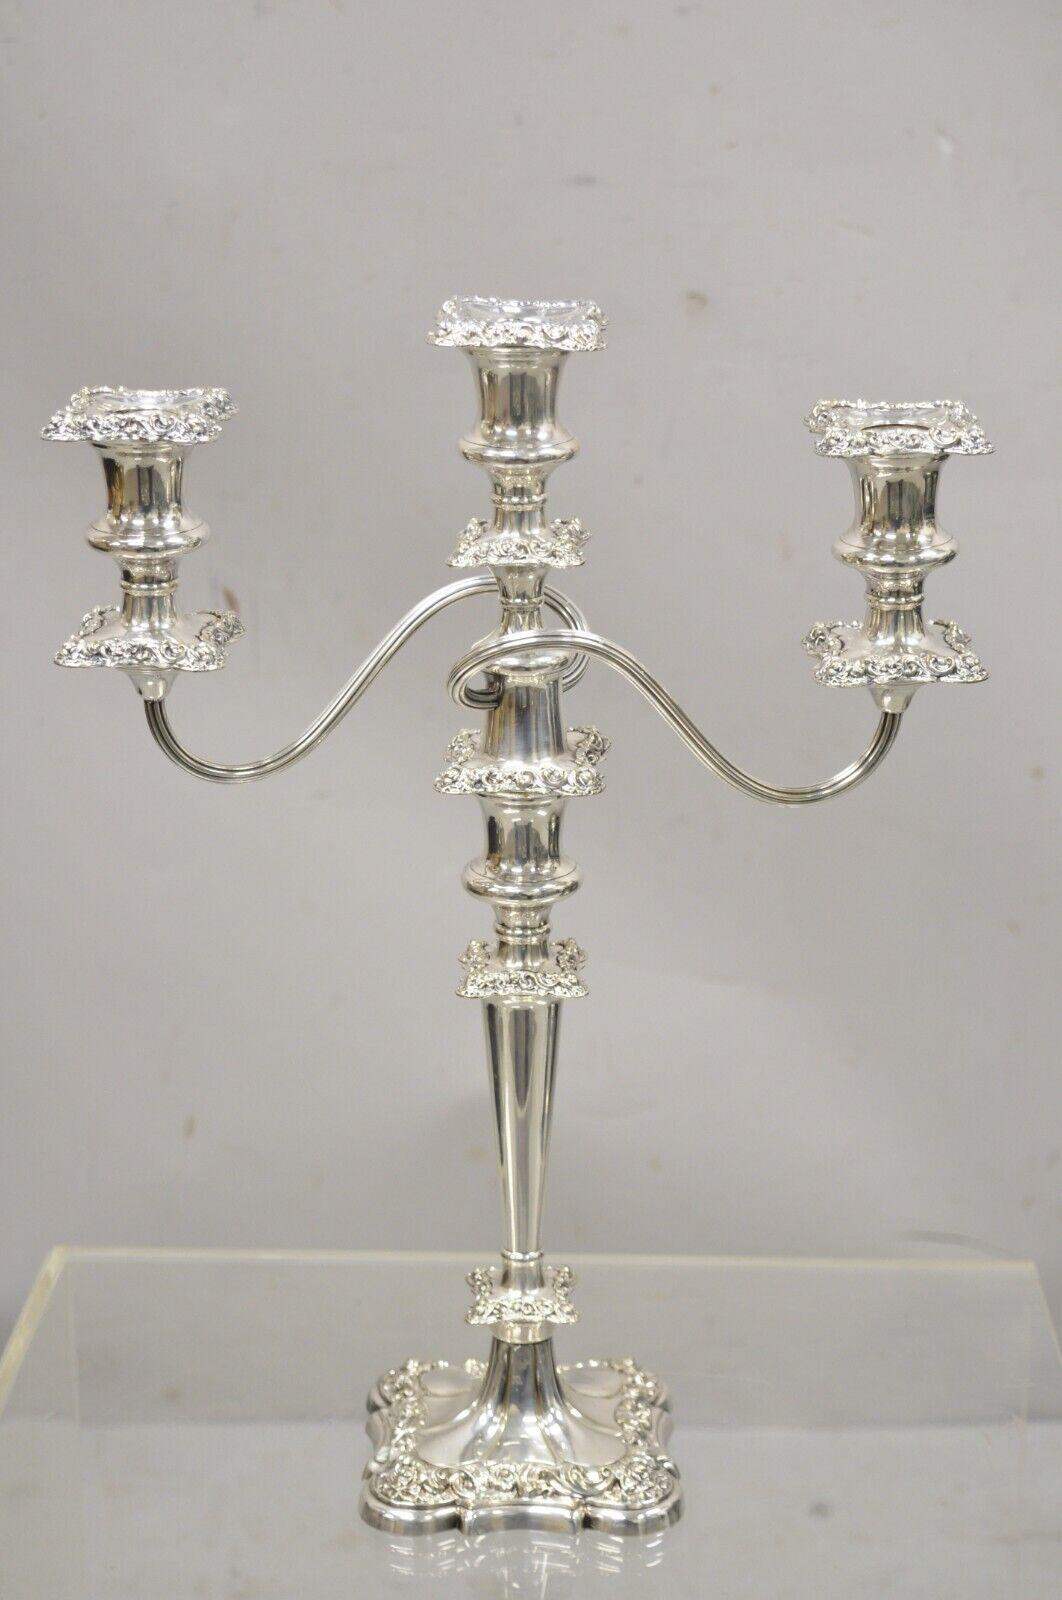 Antique Gorham Floral Repousse Twin Arm Silver Plated Candlestick Candelabra For Sale 6